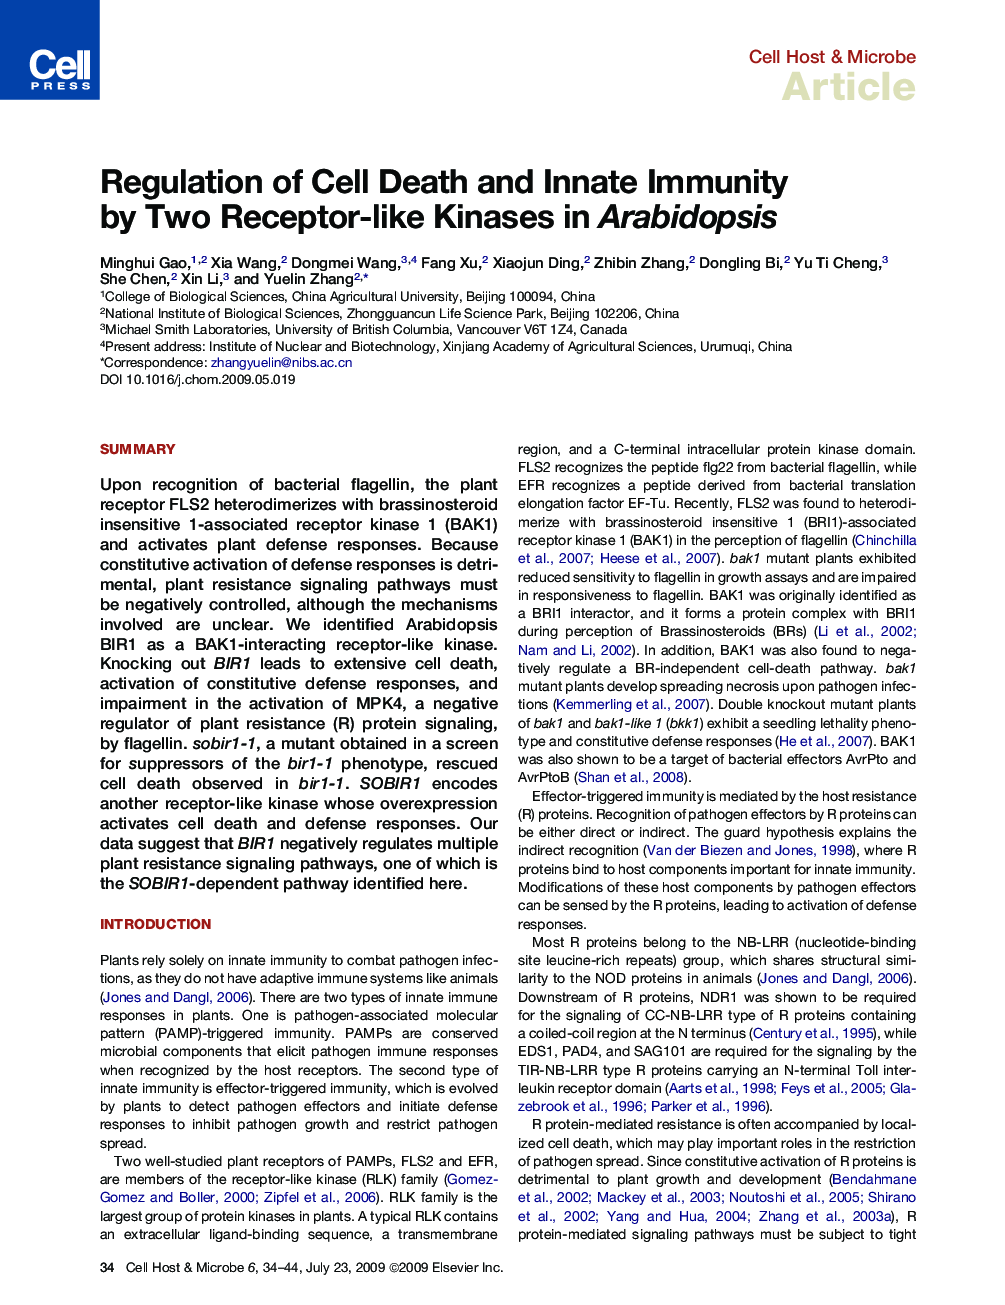 Regulation of Cell Death and Innate Immunity by Two Receptor-like Kinases in Arabidopsis